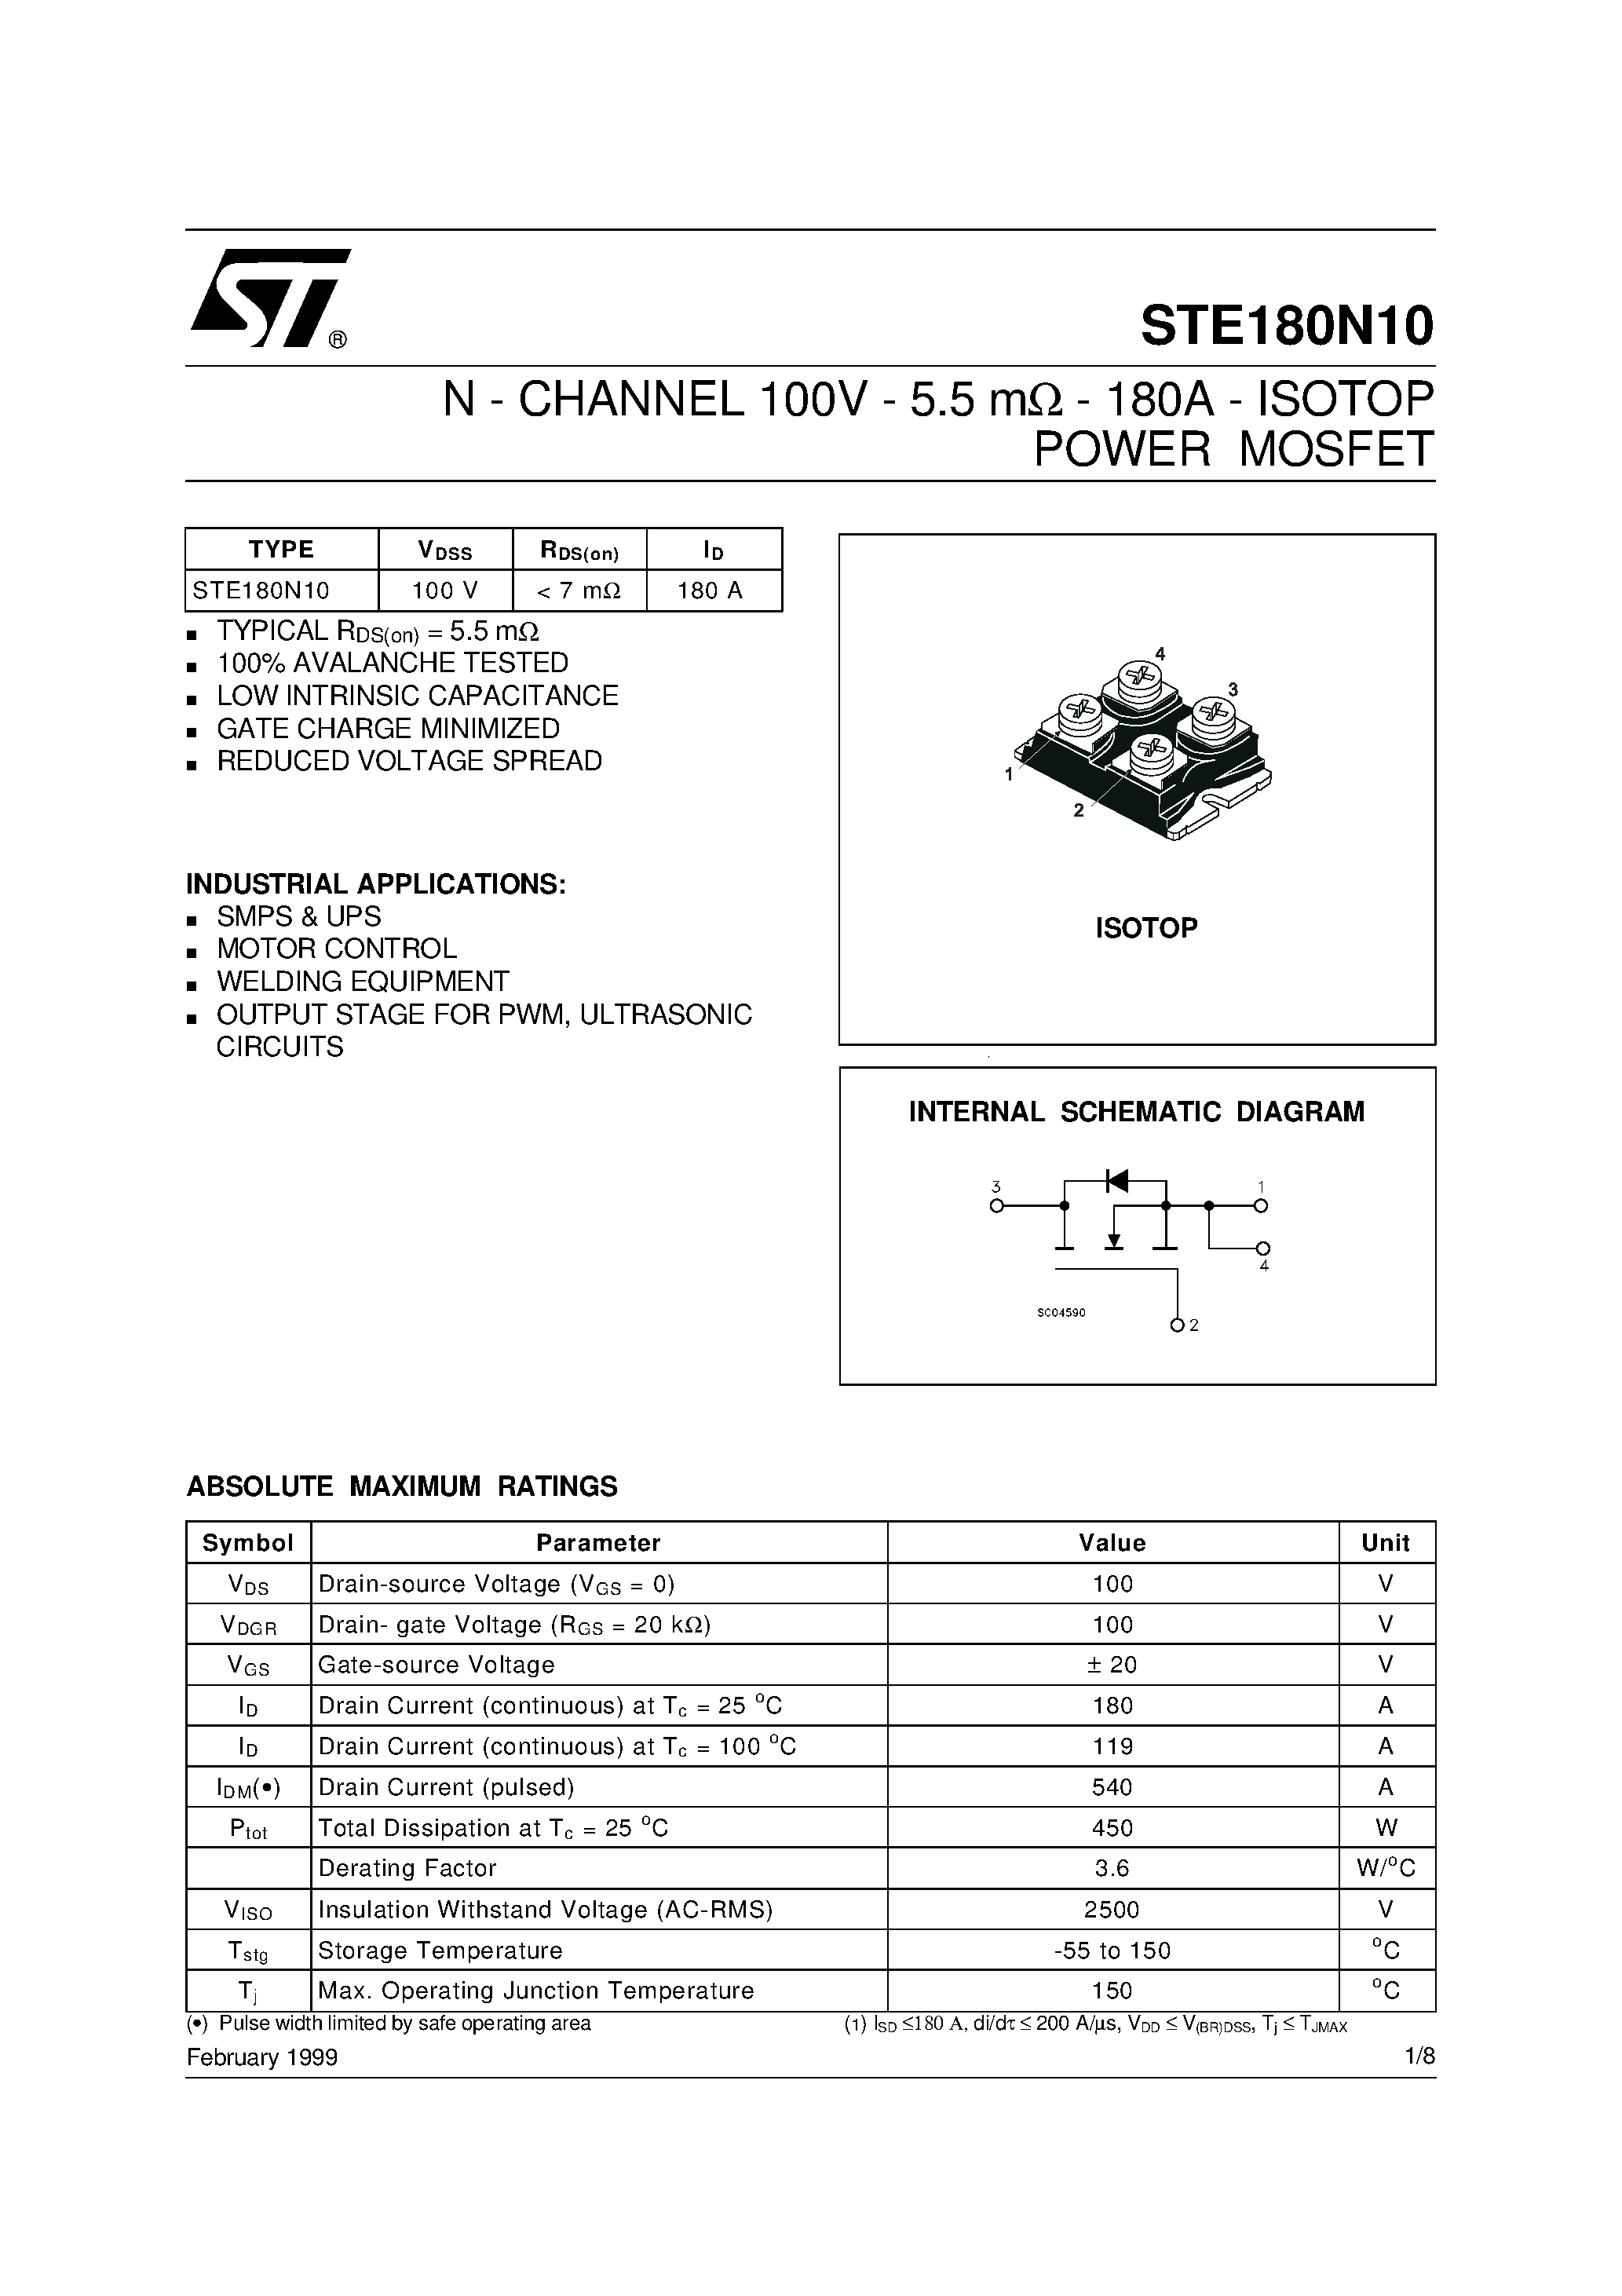 Datasheet STE180N10 - N - CHANNEL 100V - 5.5 mohm - 180A - ISOTOP POWER MOSFET page 1